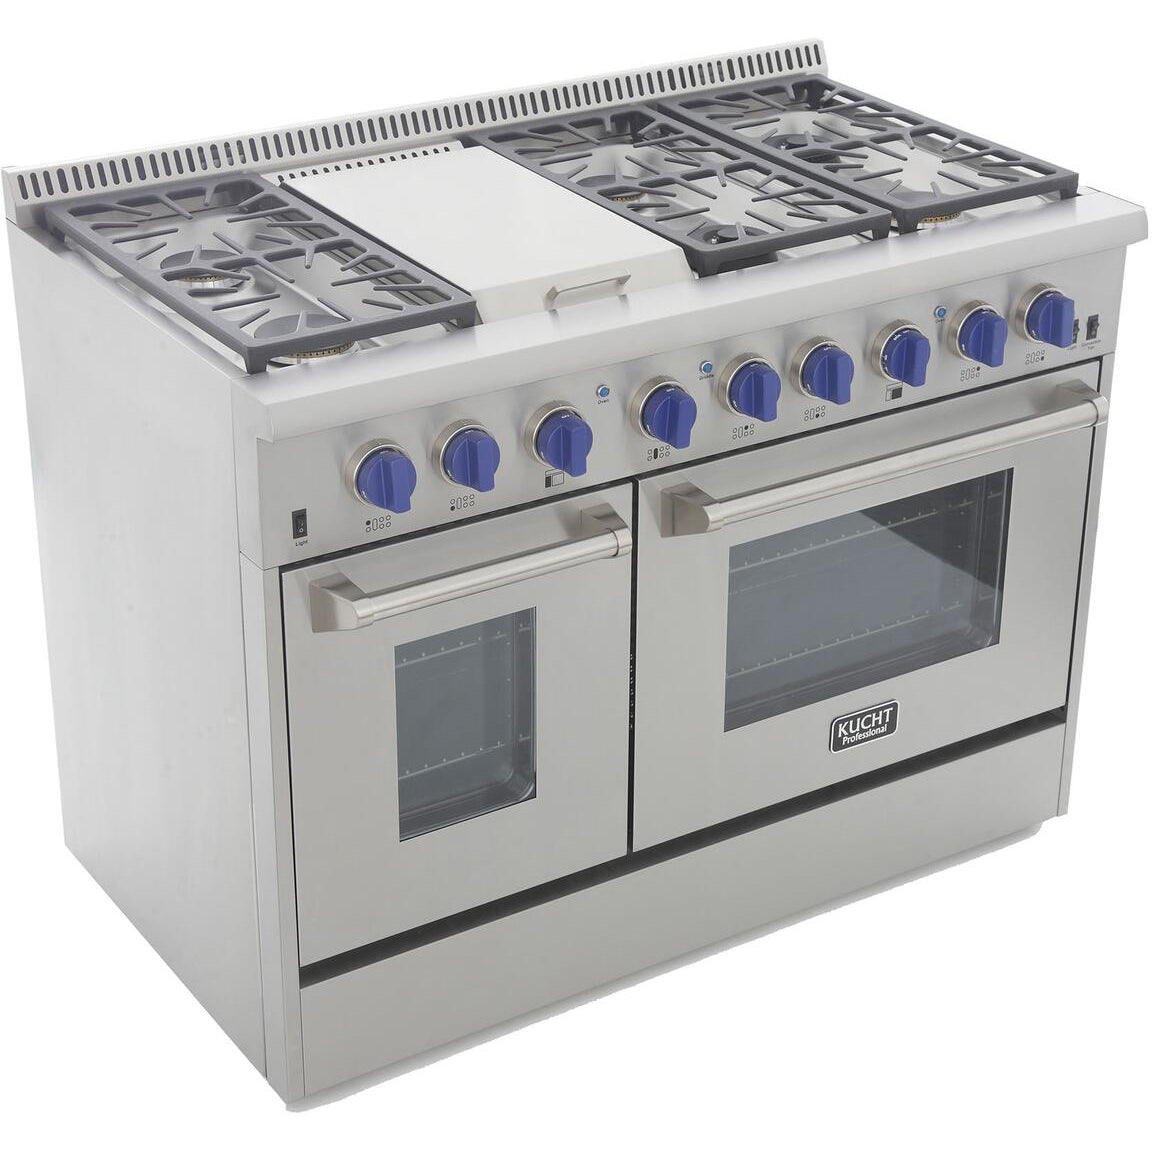 Kucht KRG Series 48" Freestanding Natural Gas Range With 6 Burners, Griddle and Royal Blue Knobs